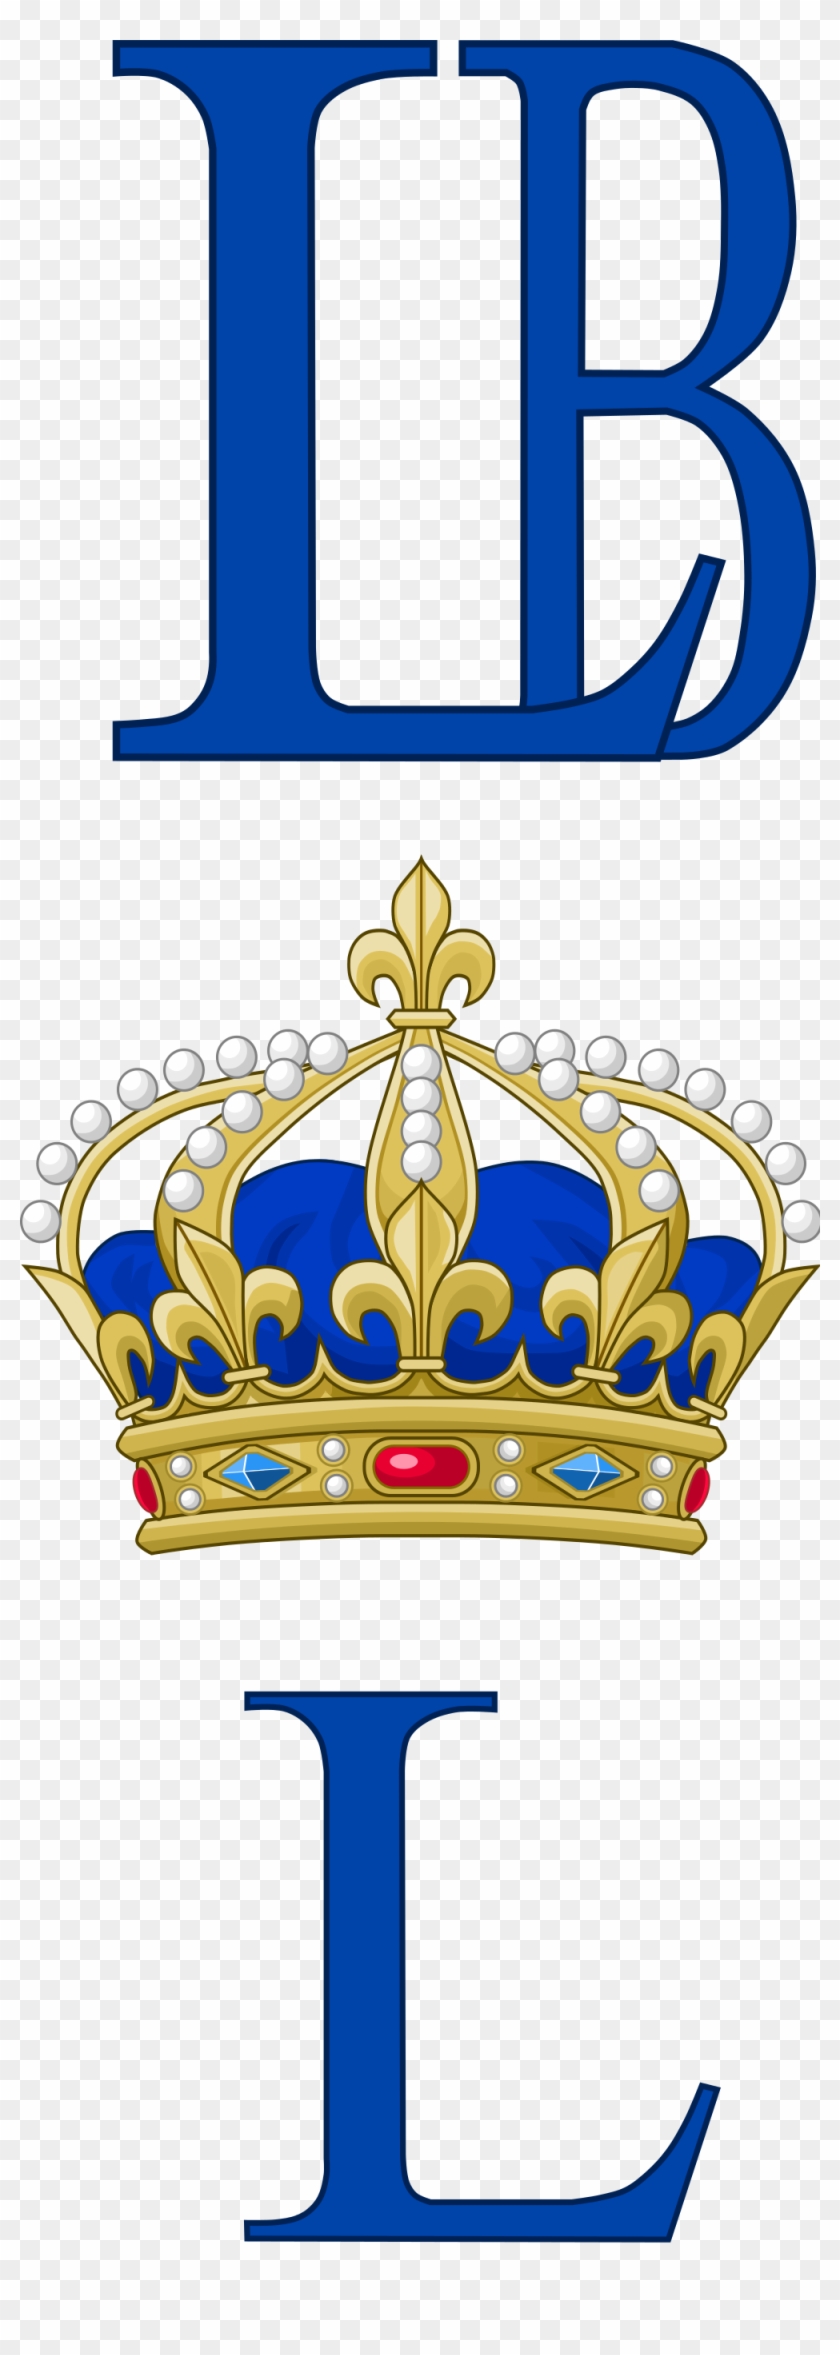 Royal Monogram Of King Louis Xiv Of France - Flag: A Proposed Flag Of France #866840